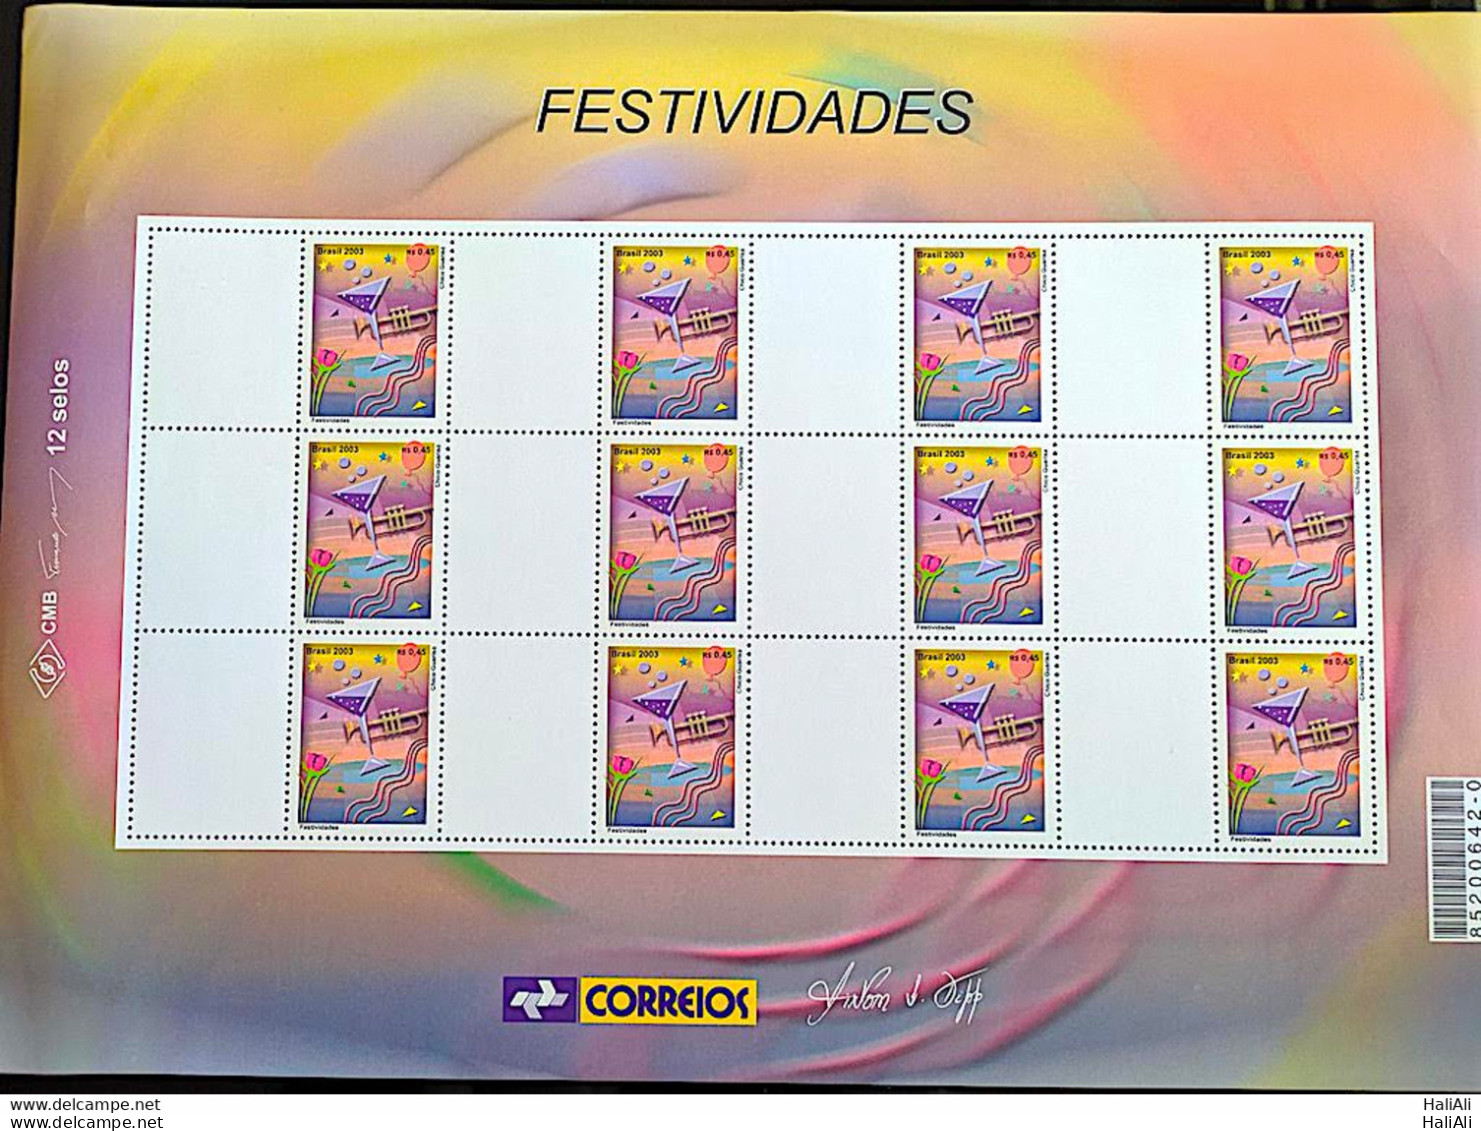 C 2540 Brazil Personalized Stamp Festivities 2003 Sheet White Vignette - Personalized Stamps